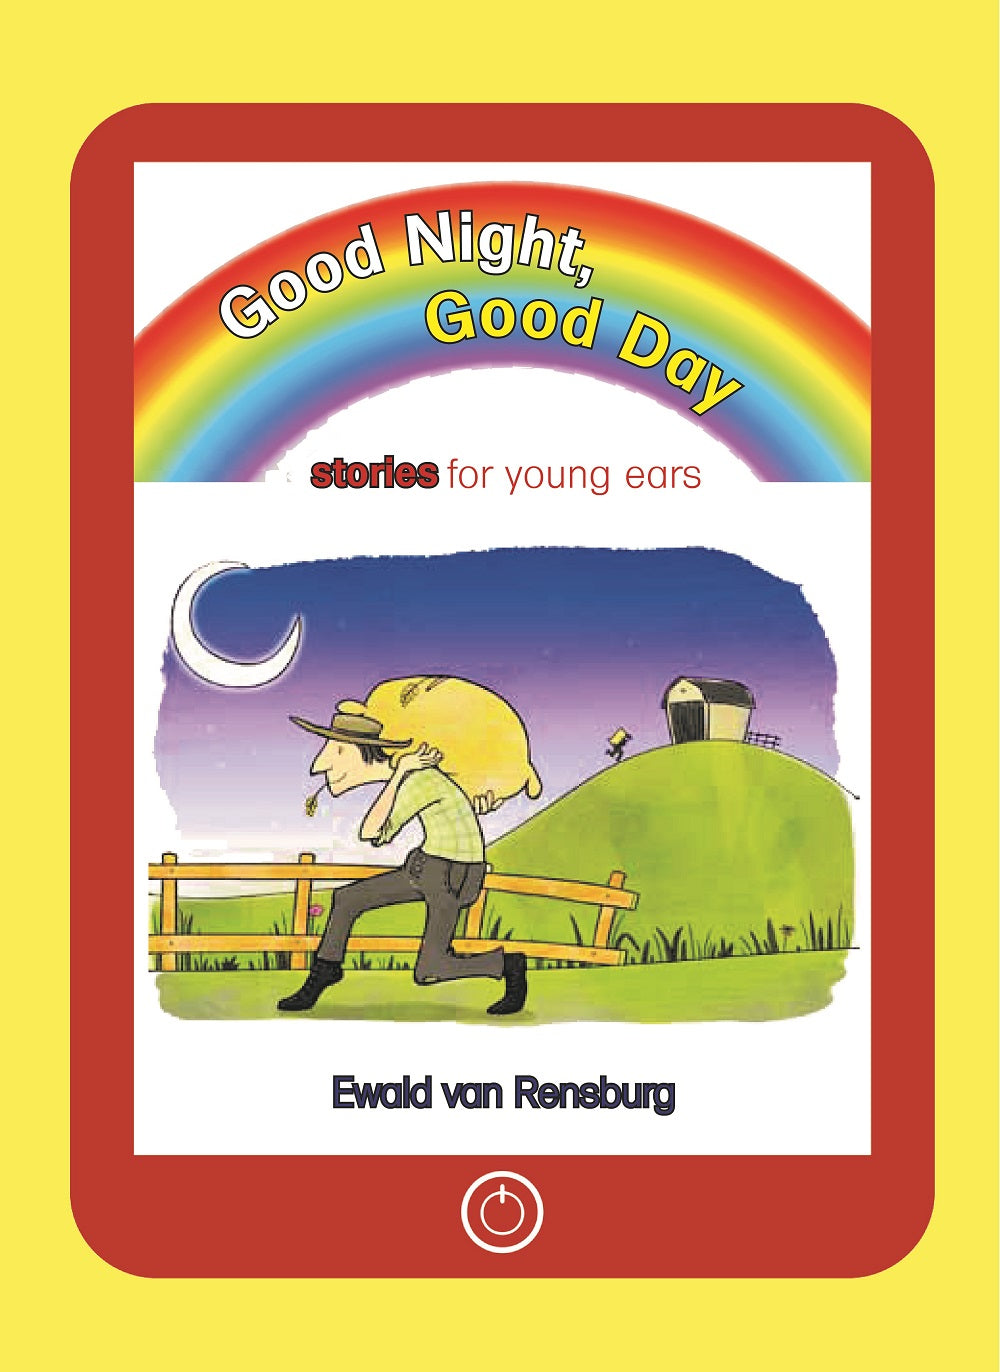 Good Night, Good Day: Stories for young ears